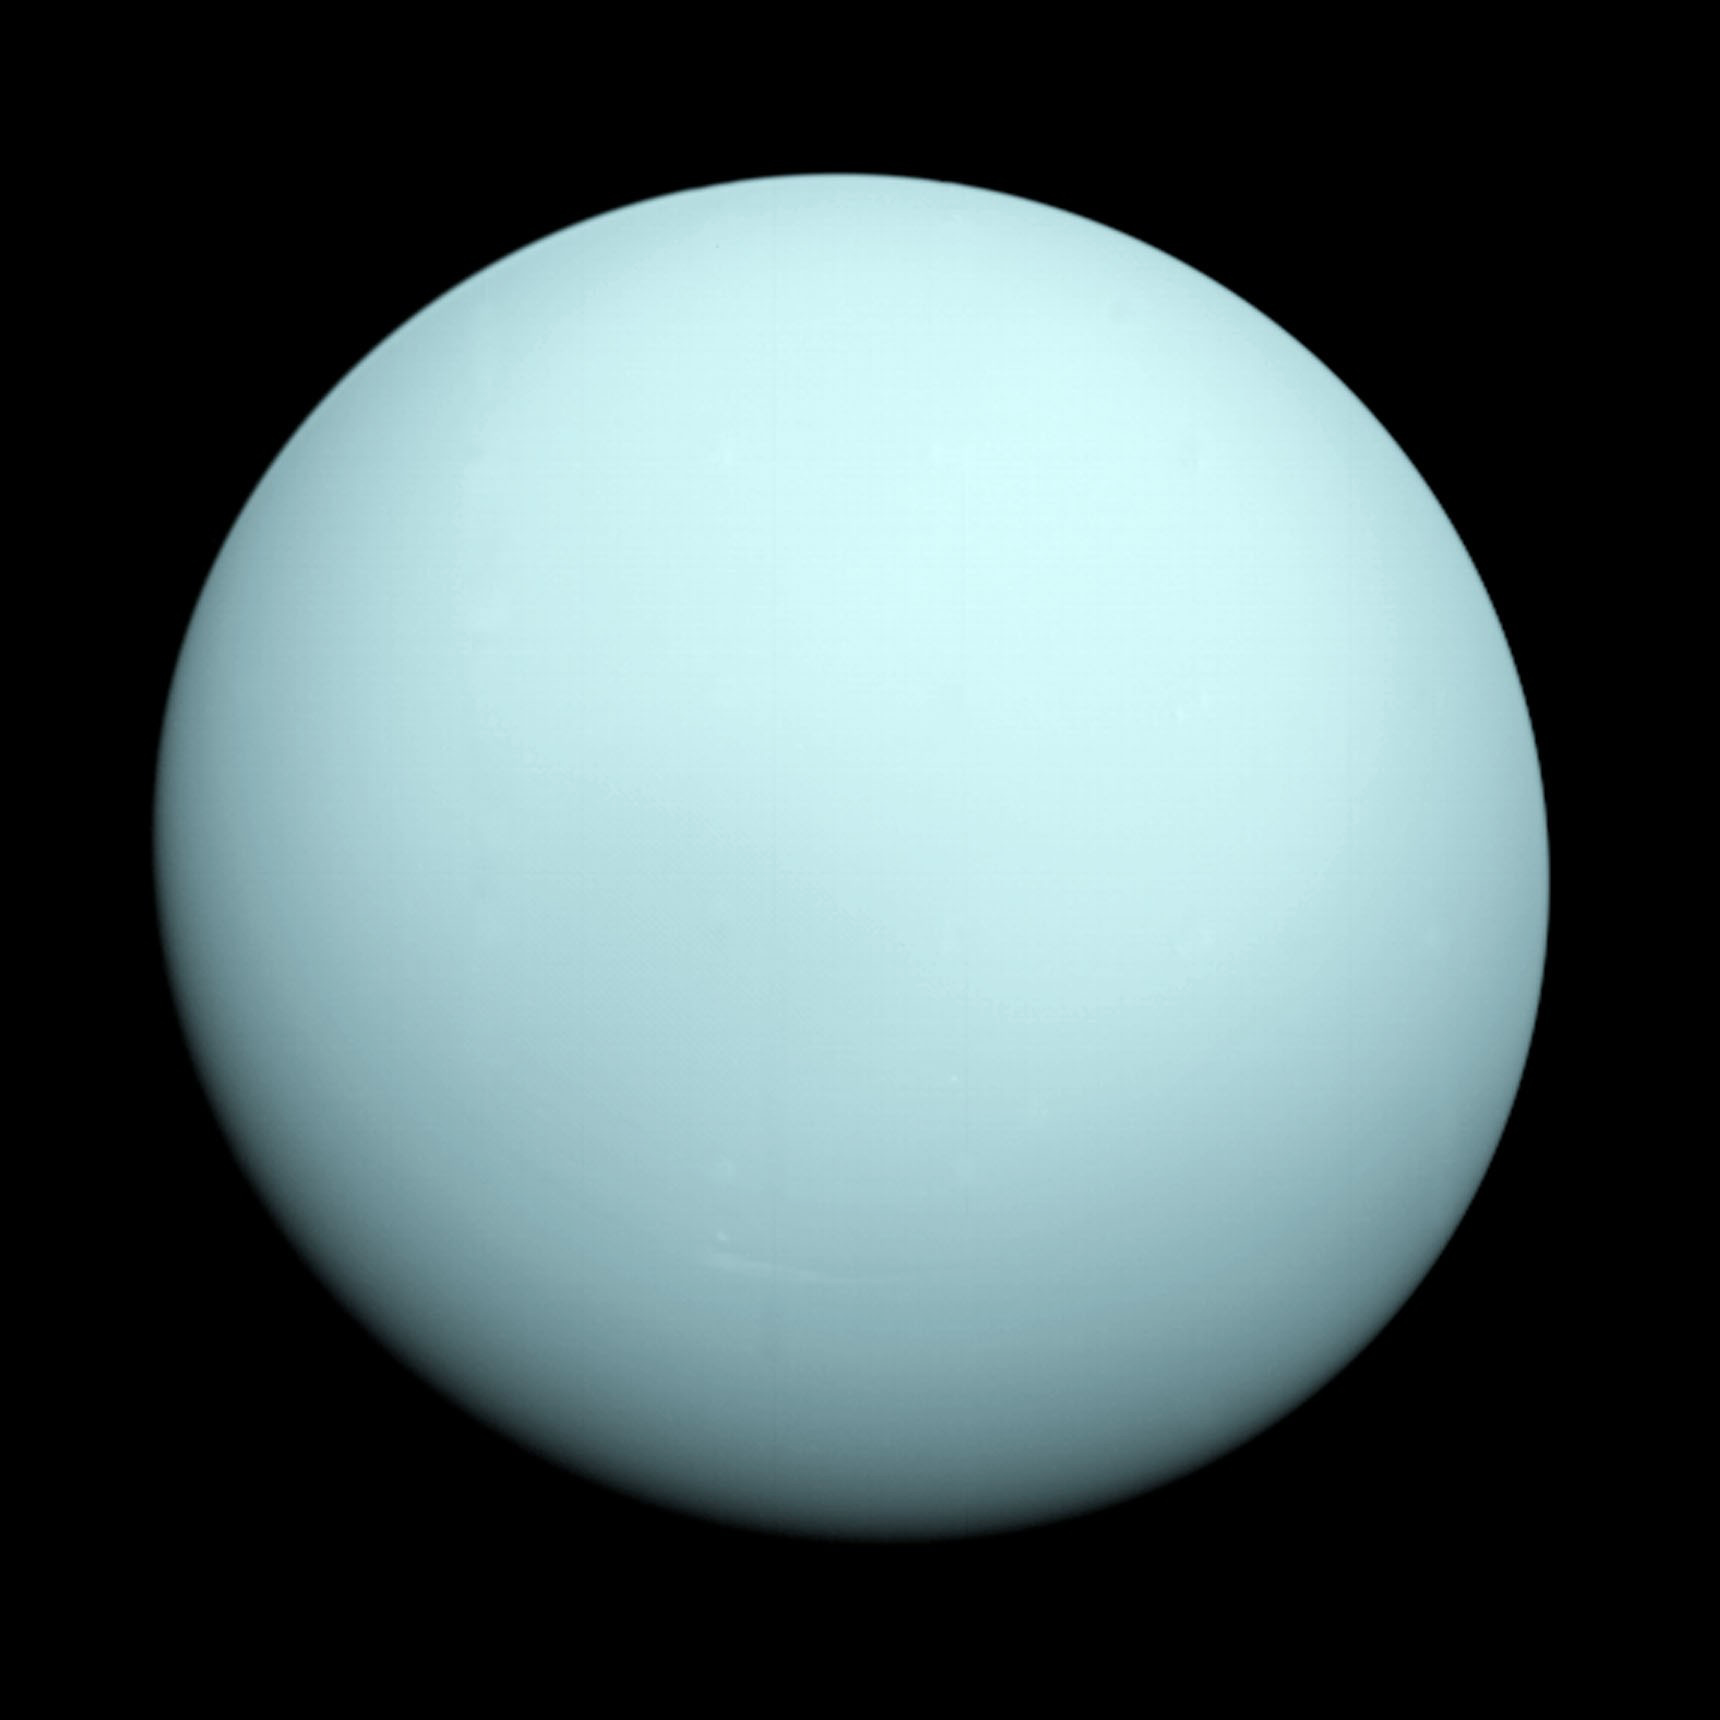 An image shows Uranus as a pale, blue-green sphere against a black background